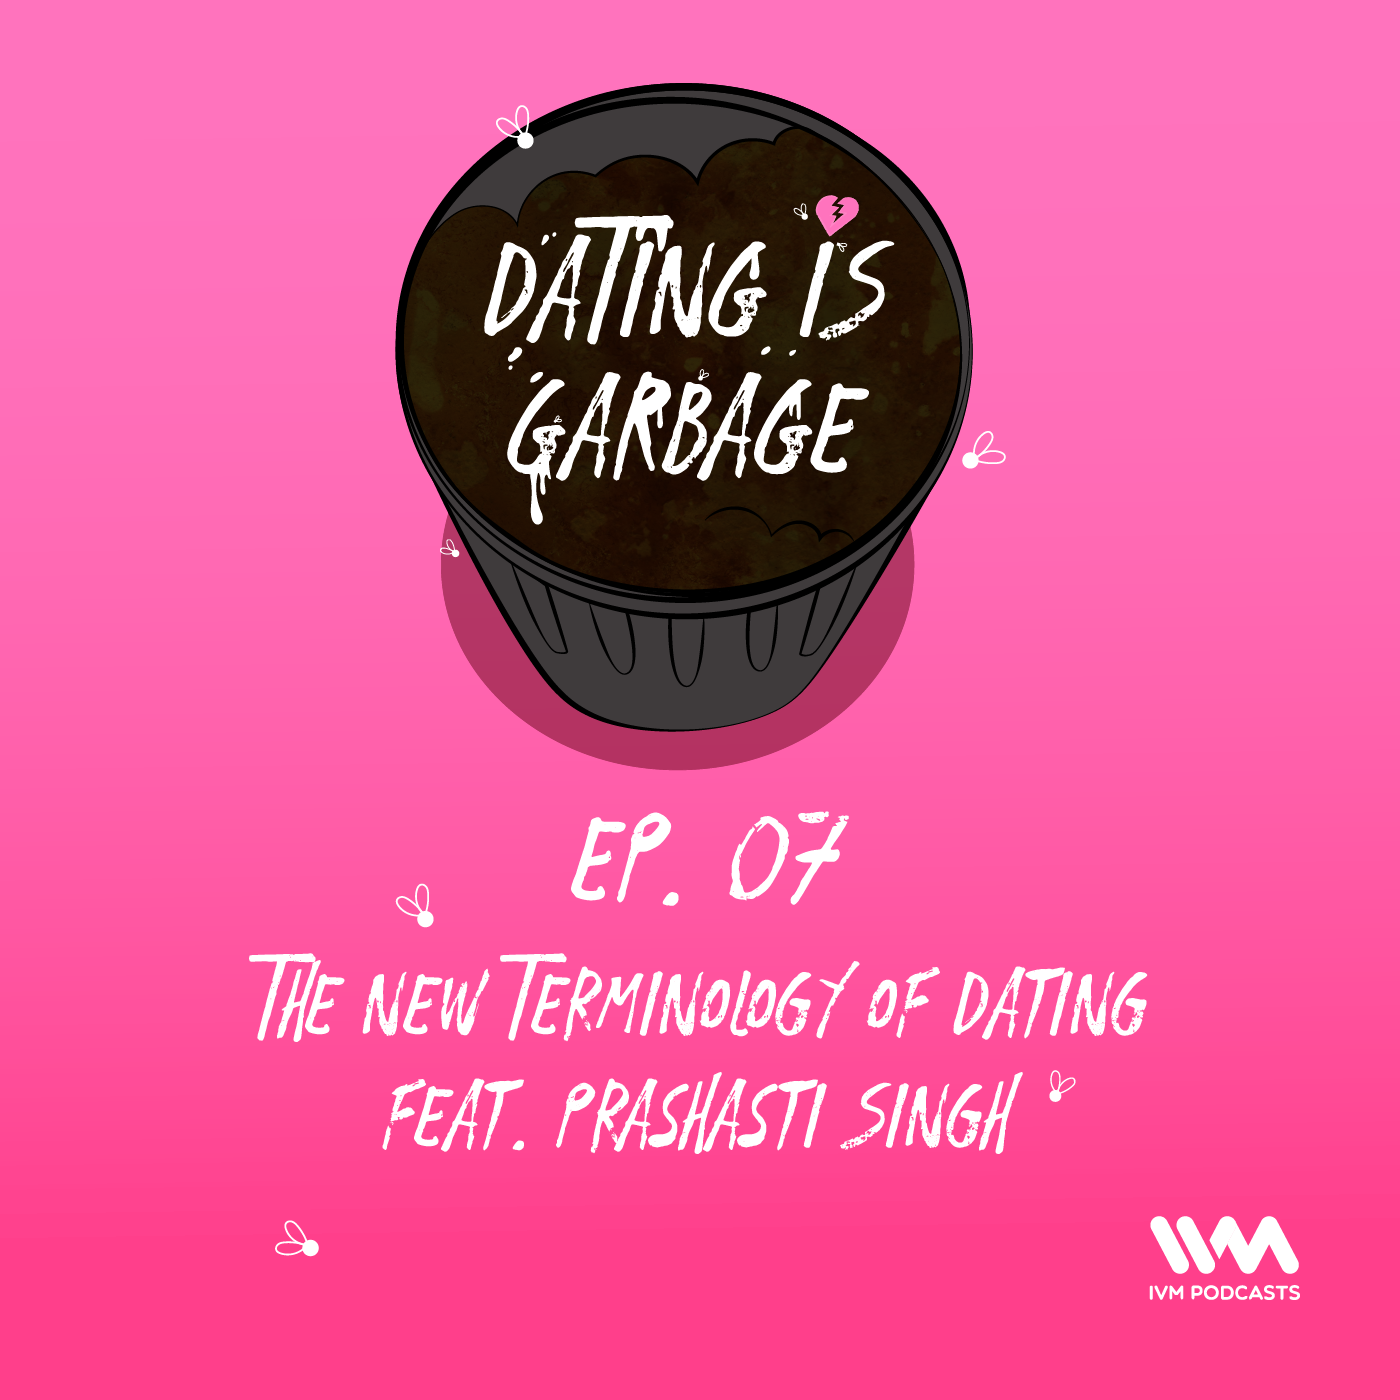 Ep. 07: The New Terminology of Dating